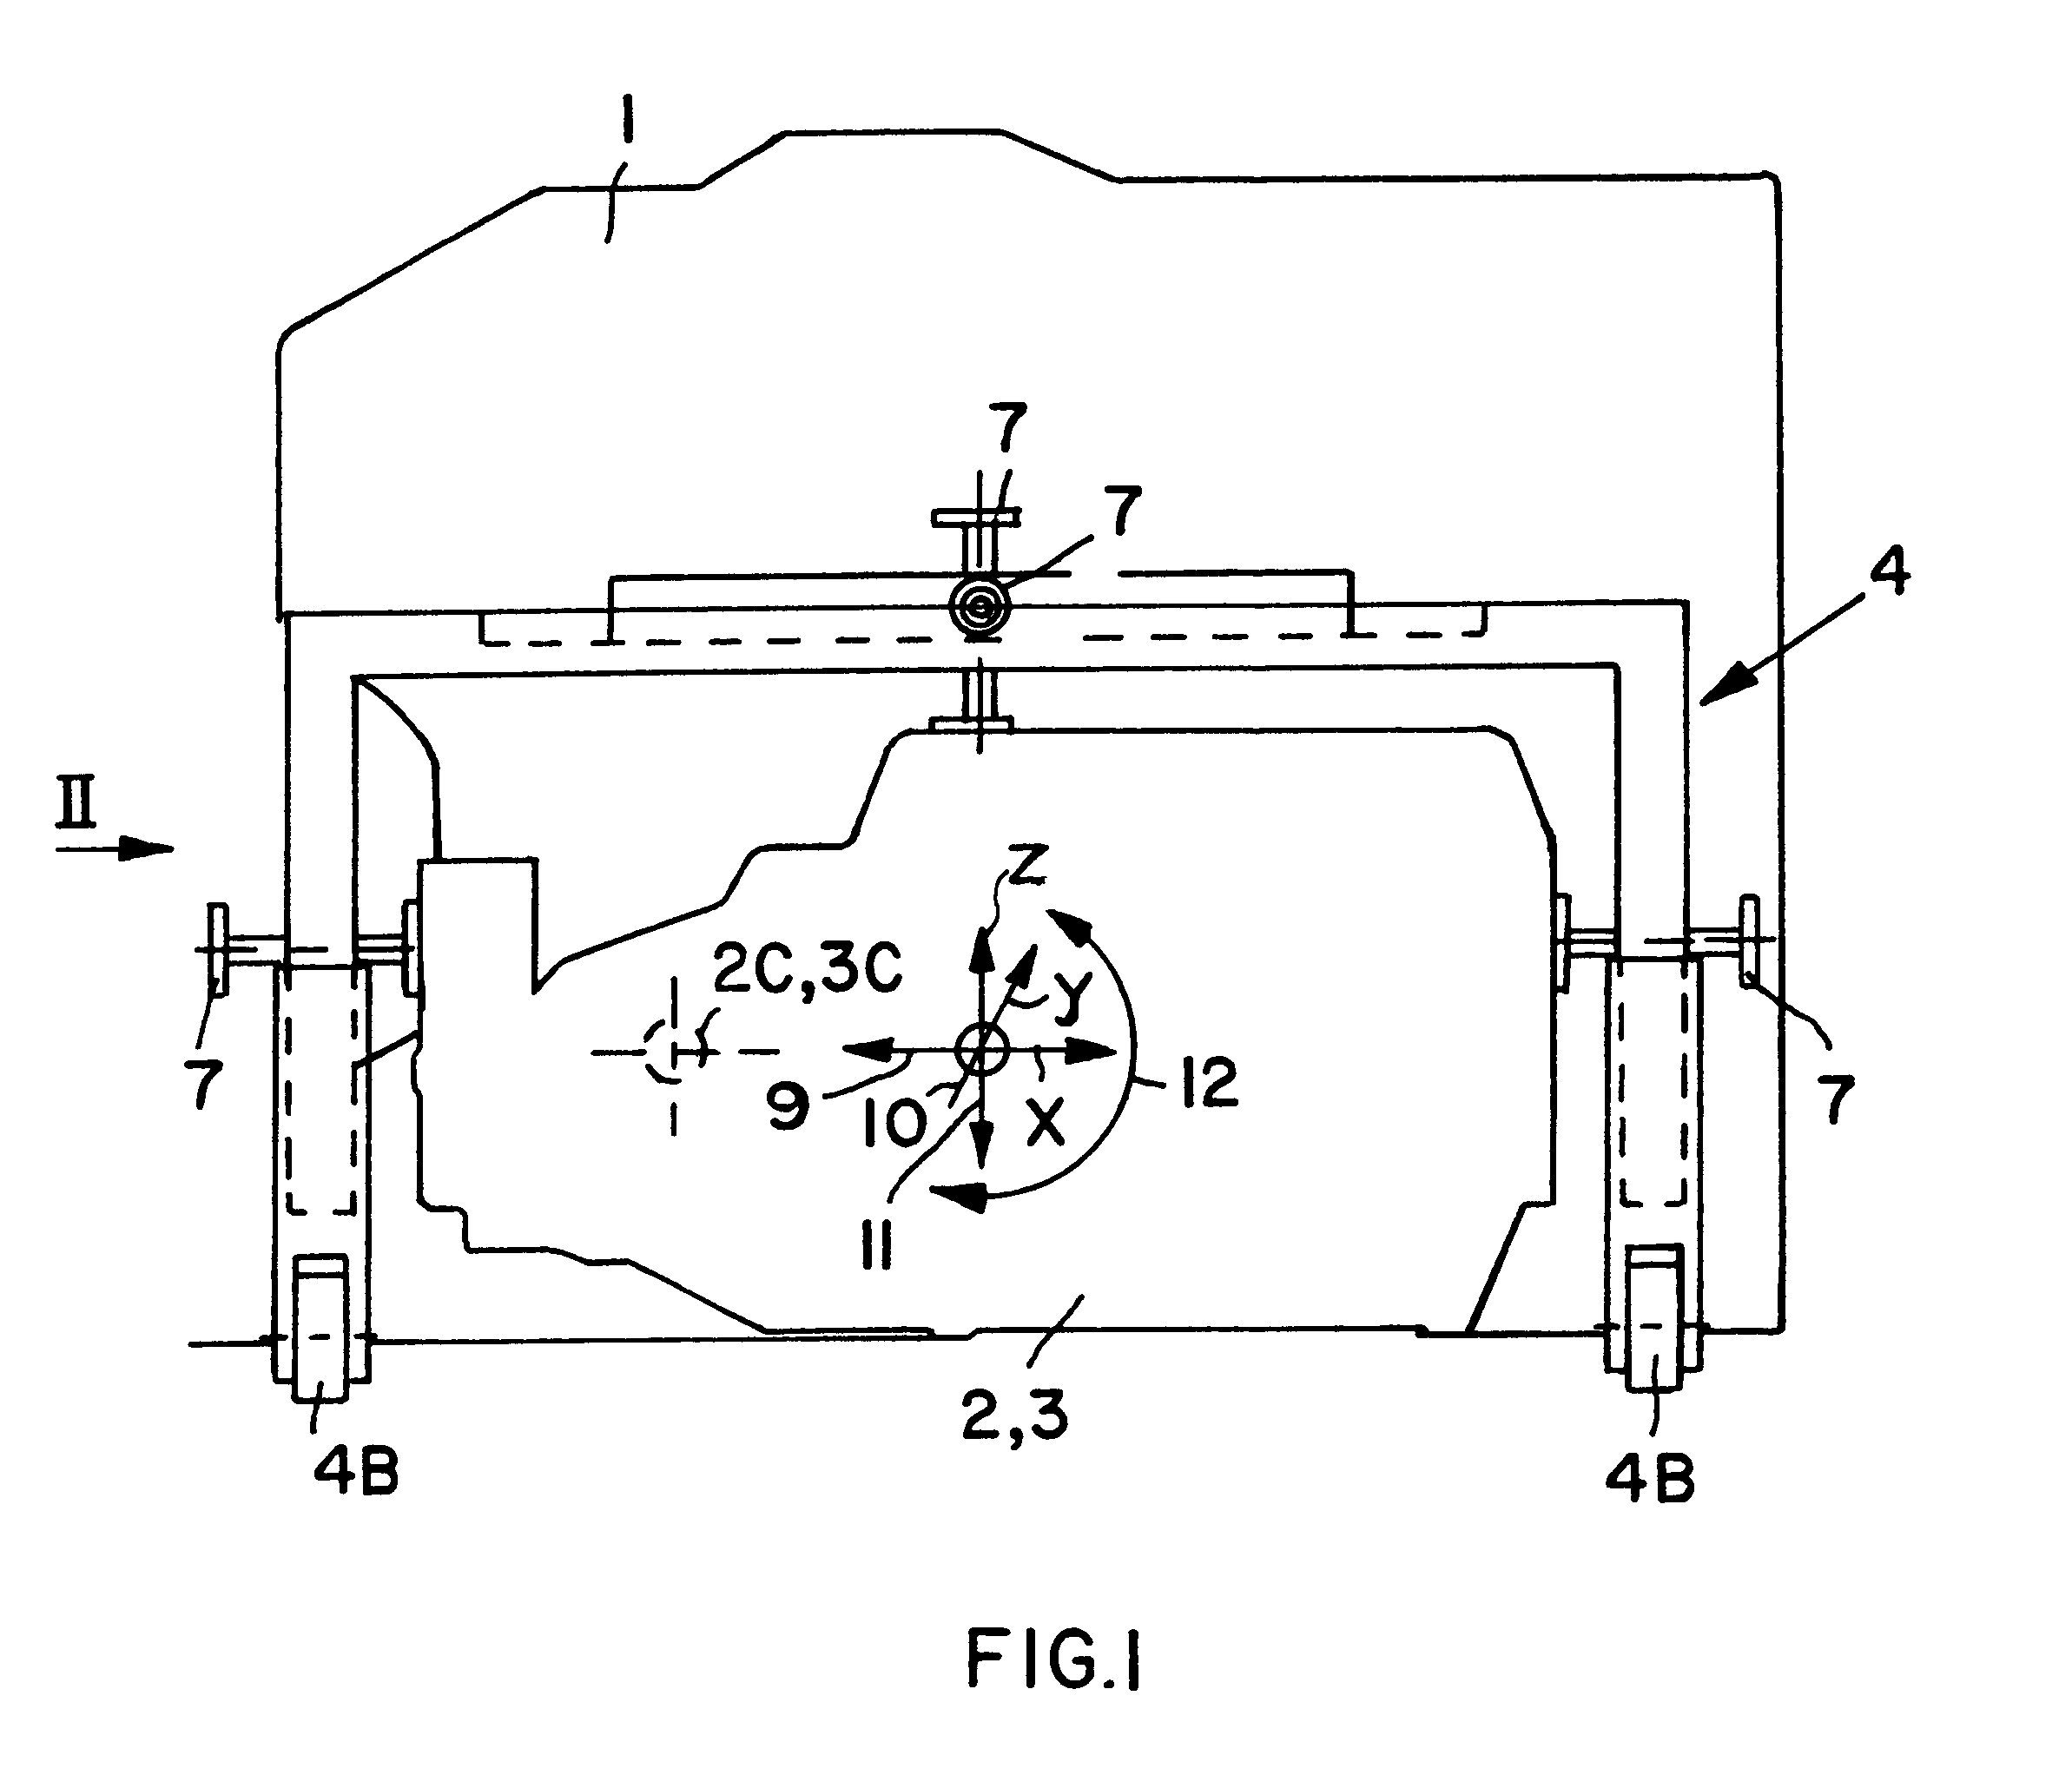 Method and apparatus for rapidly exchanging a shed drive in a heald loom